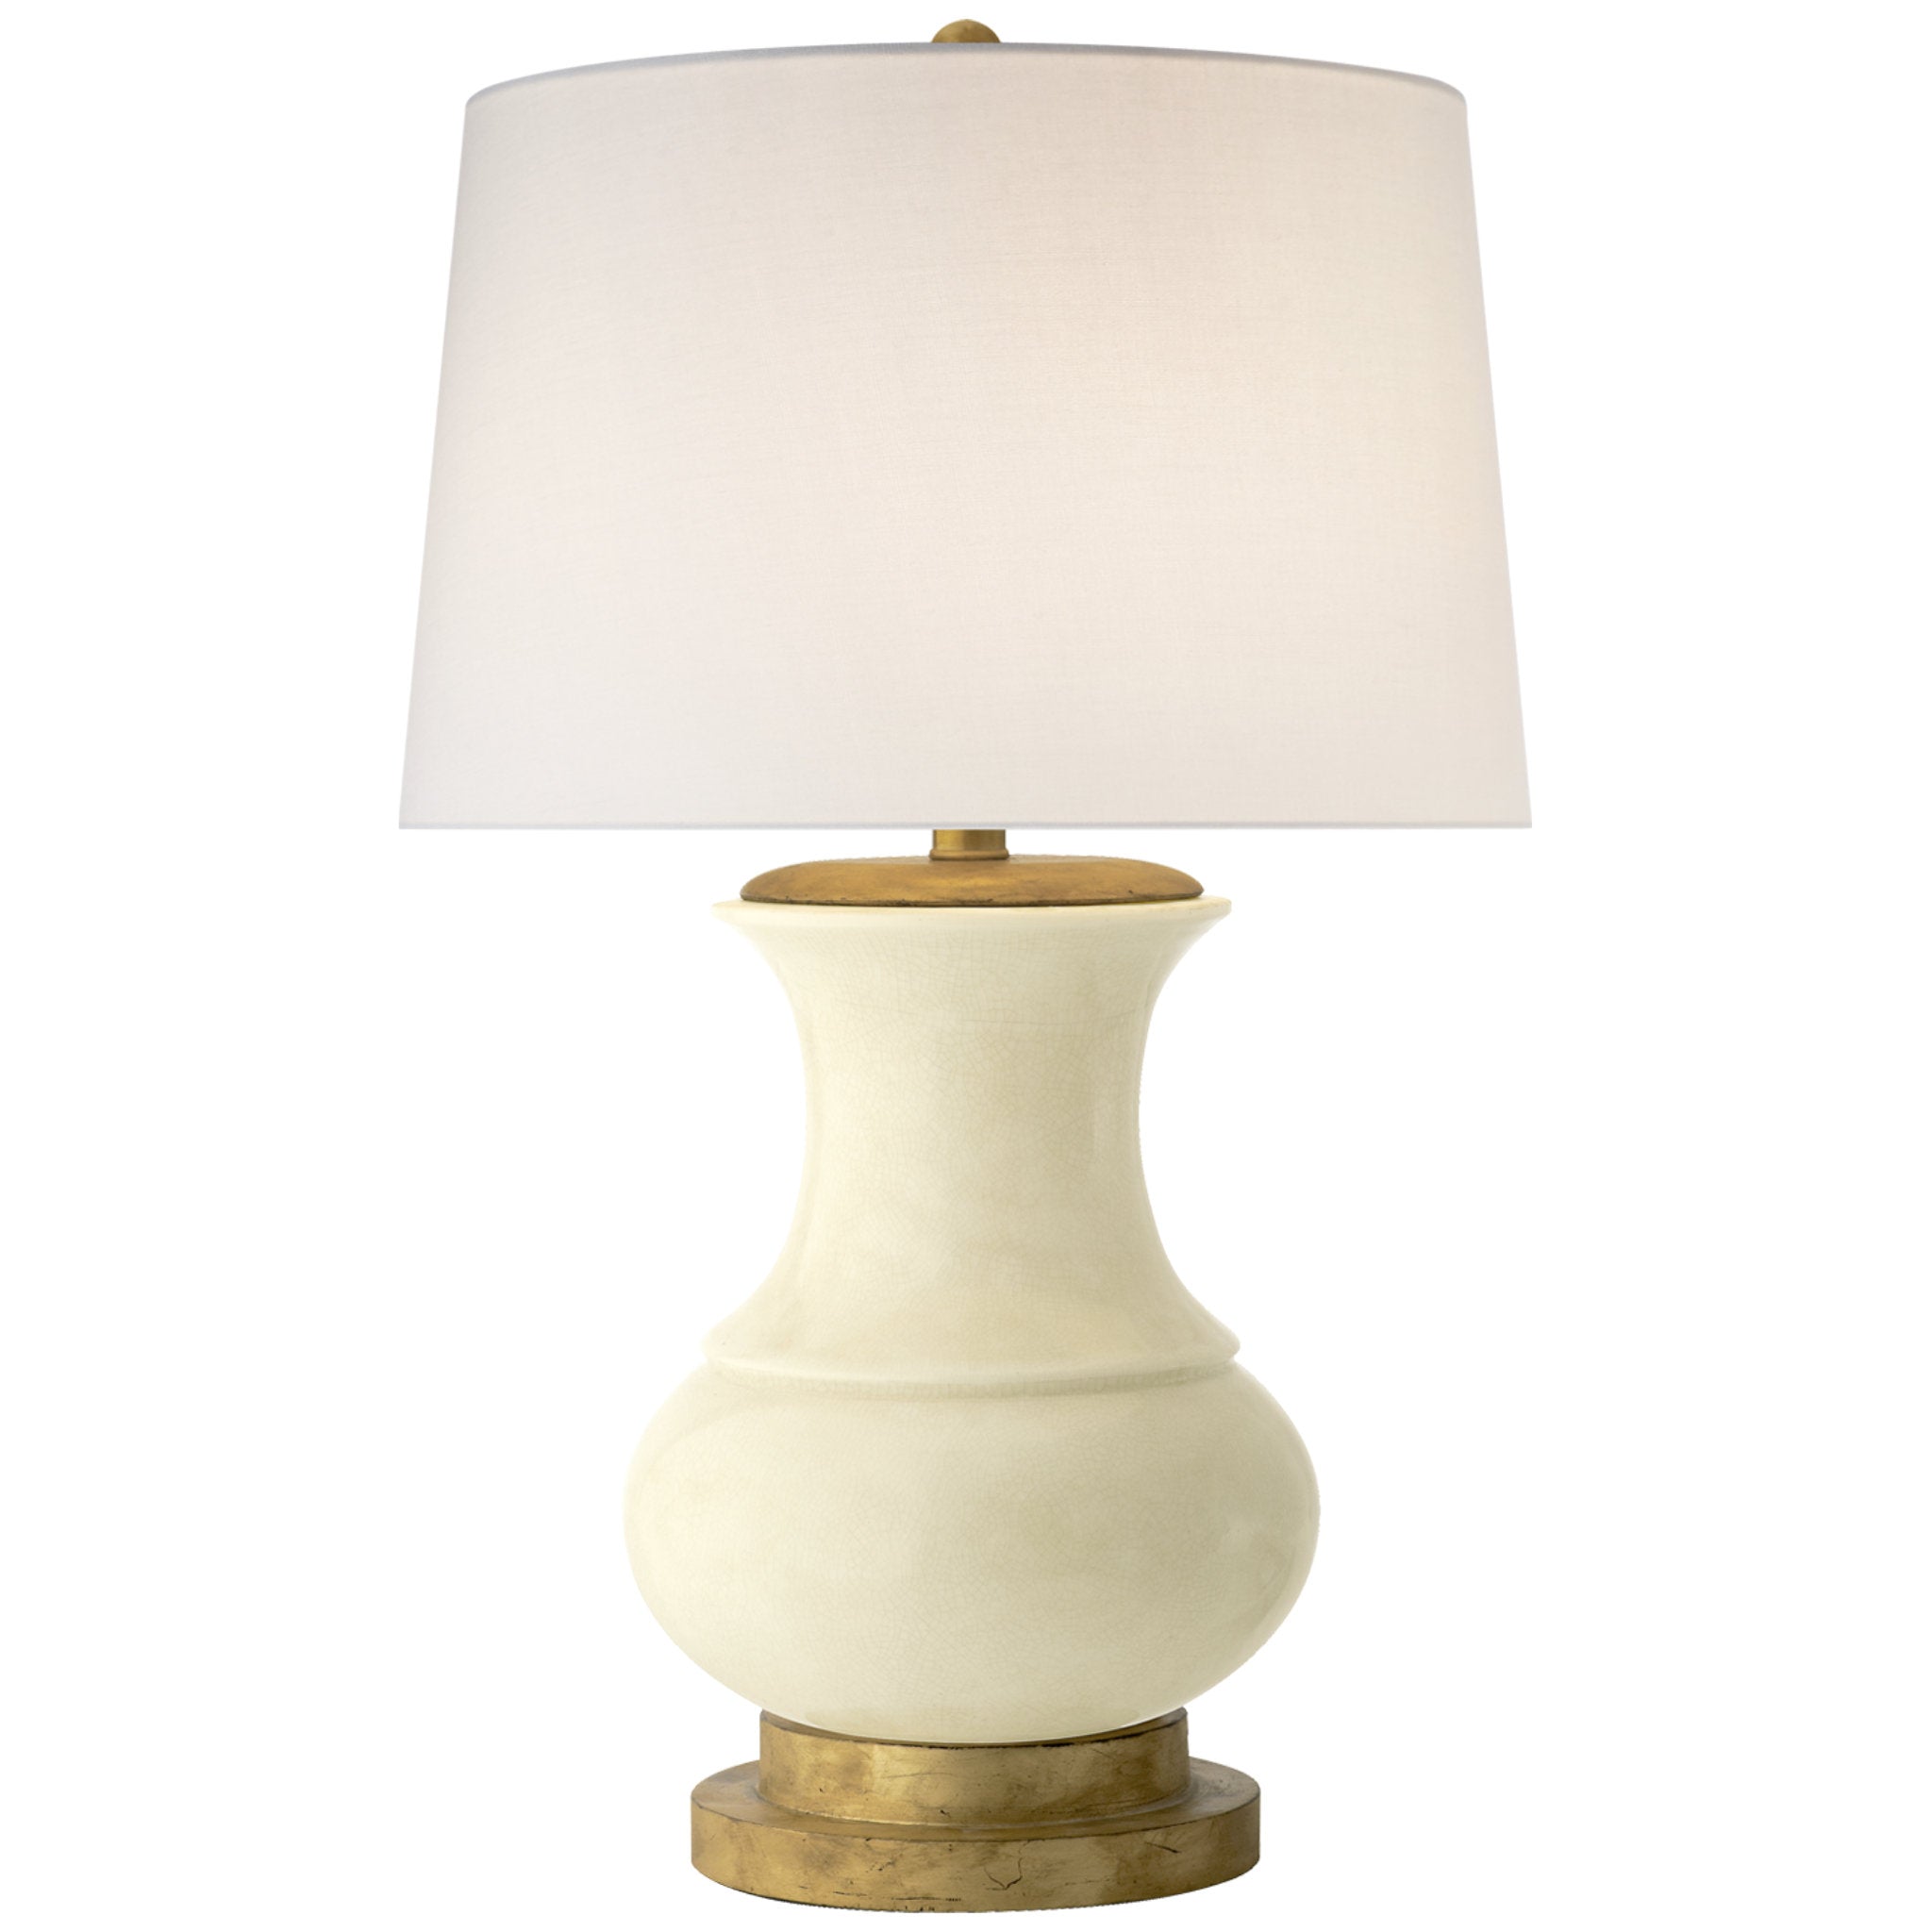 Chapman & Myers Deauville Table Lamp in Tea Stain Porcelain with Linen Shade